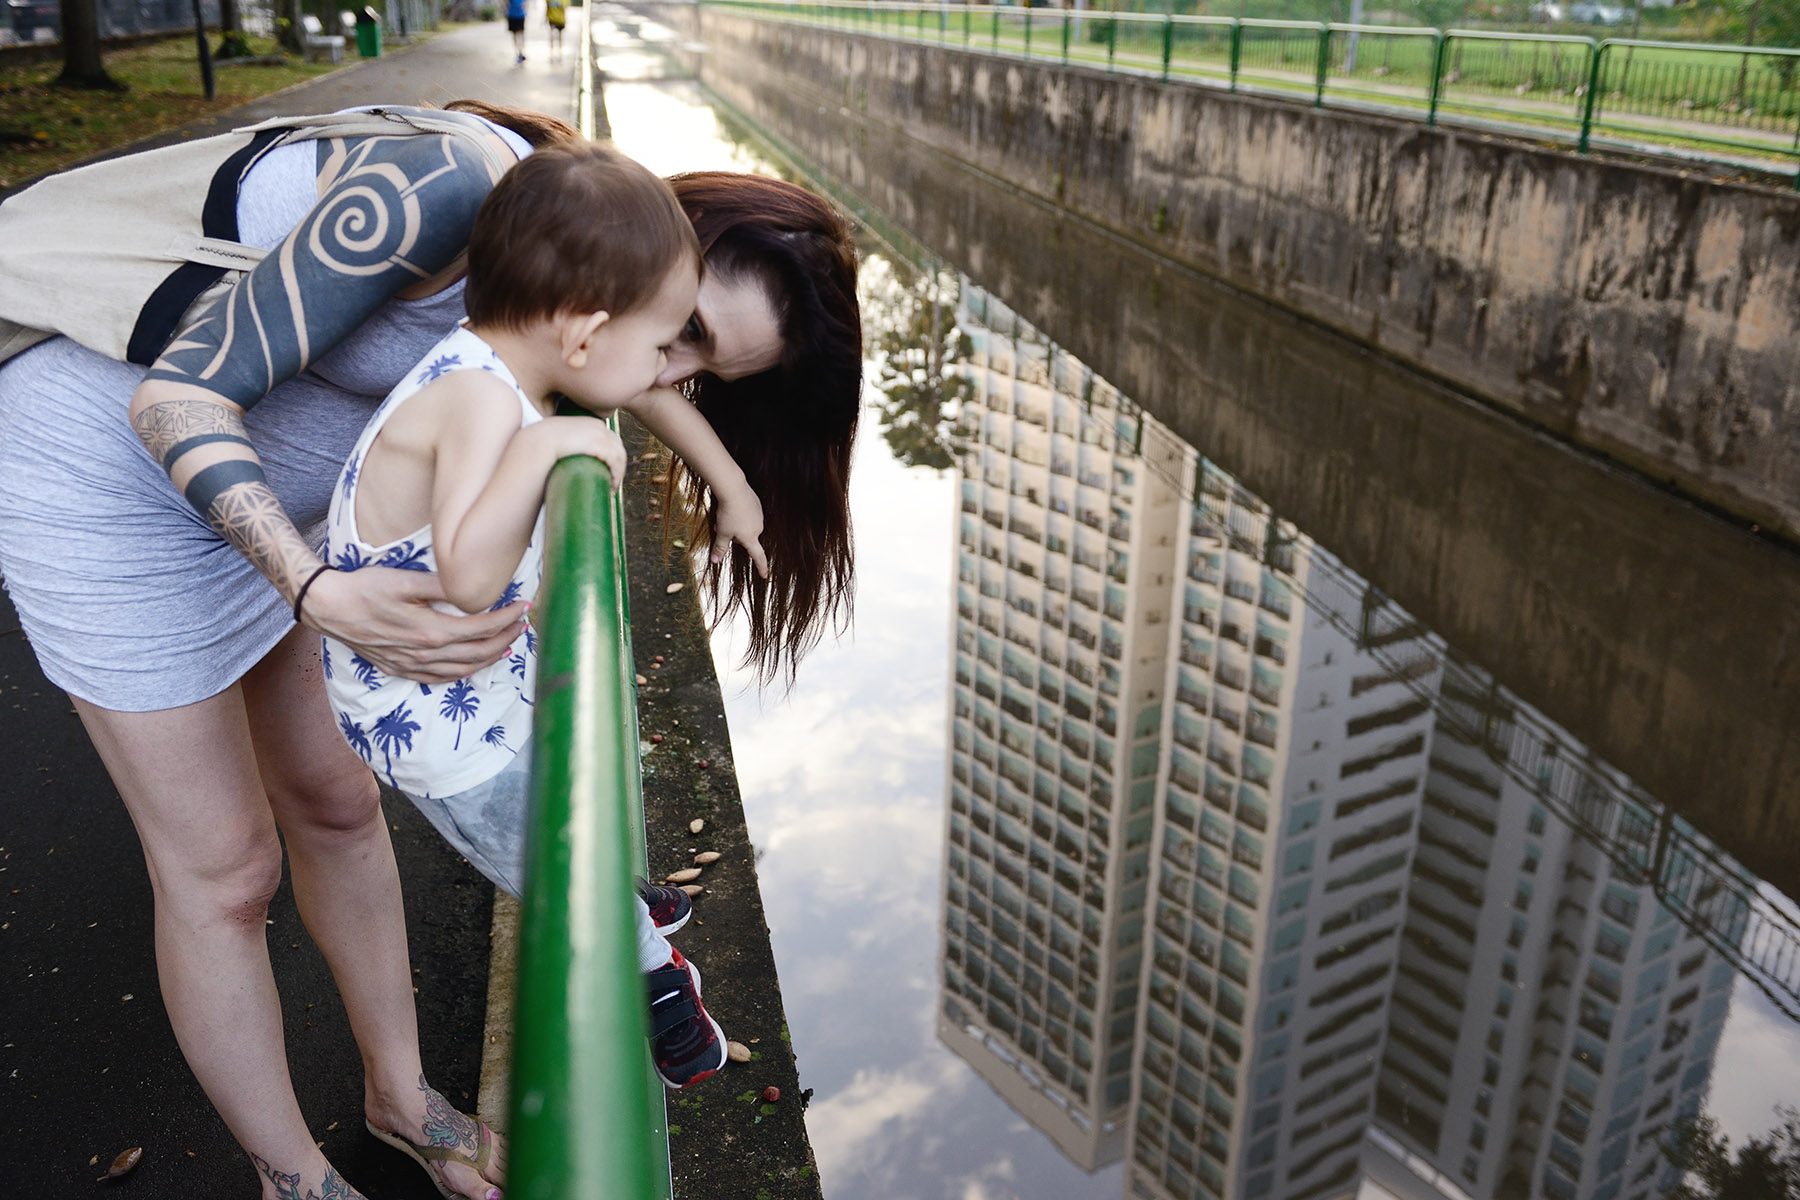 A mom stands with her toddler at a canal, the building's reflection on the water. She has tattoos on her arm